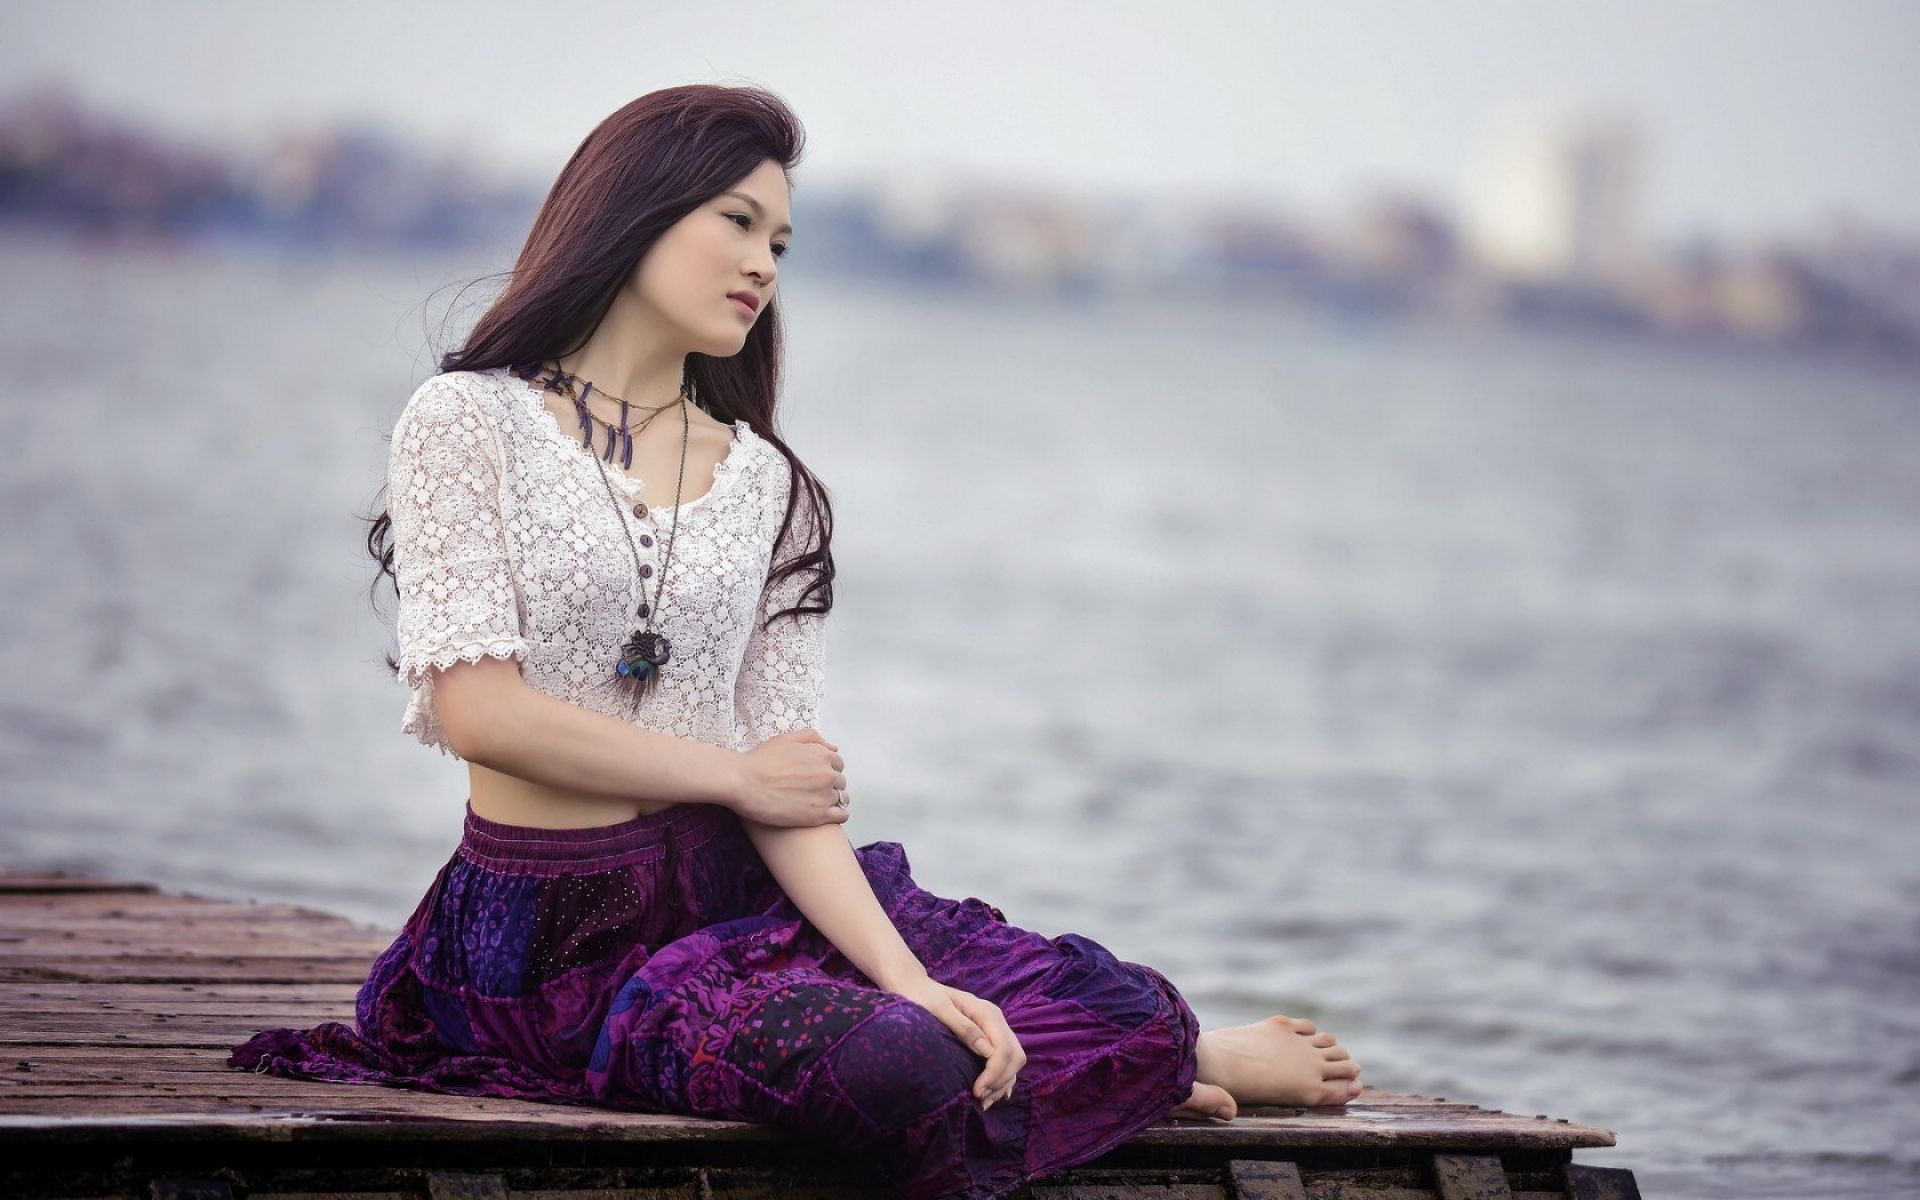 Lonely Girl On The Seashore HD | HD Models Wallpapers for Mobile and ...